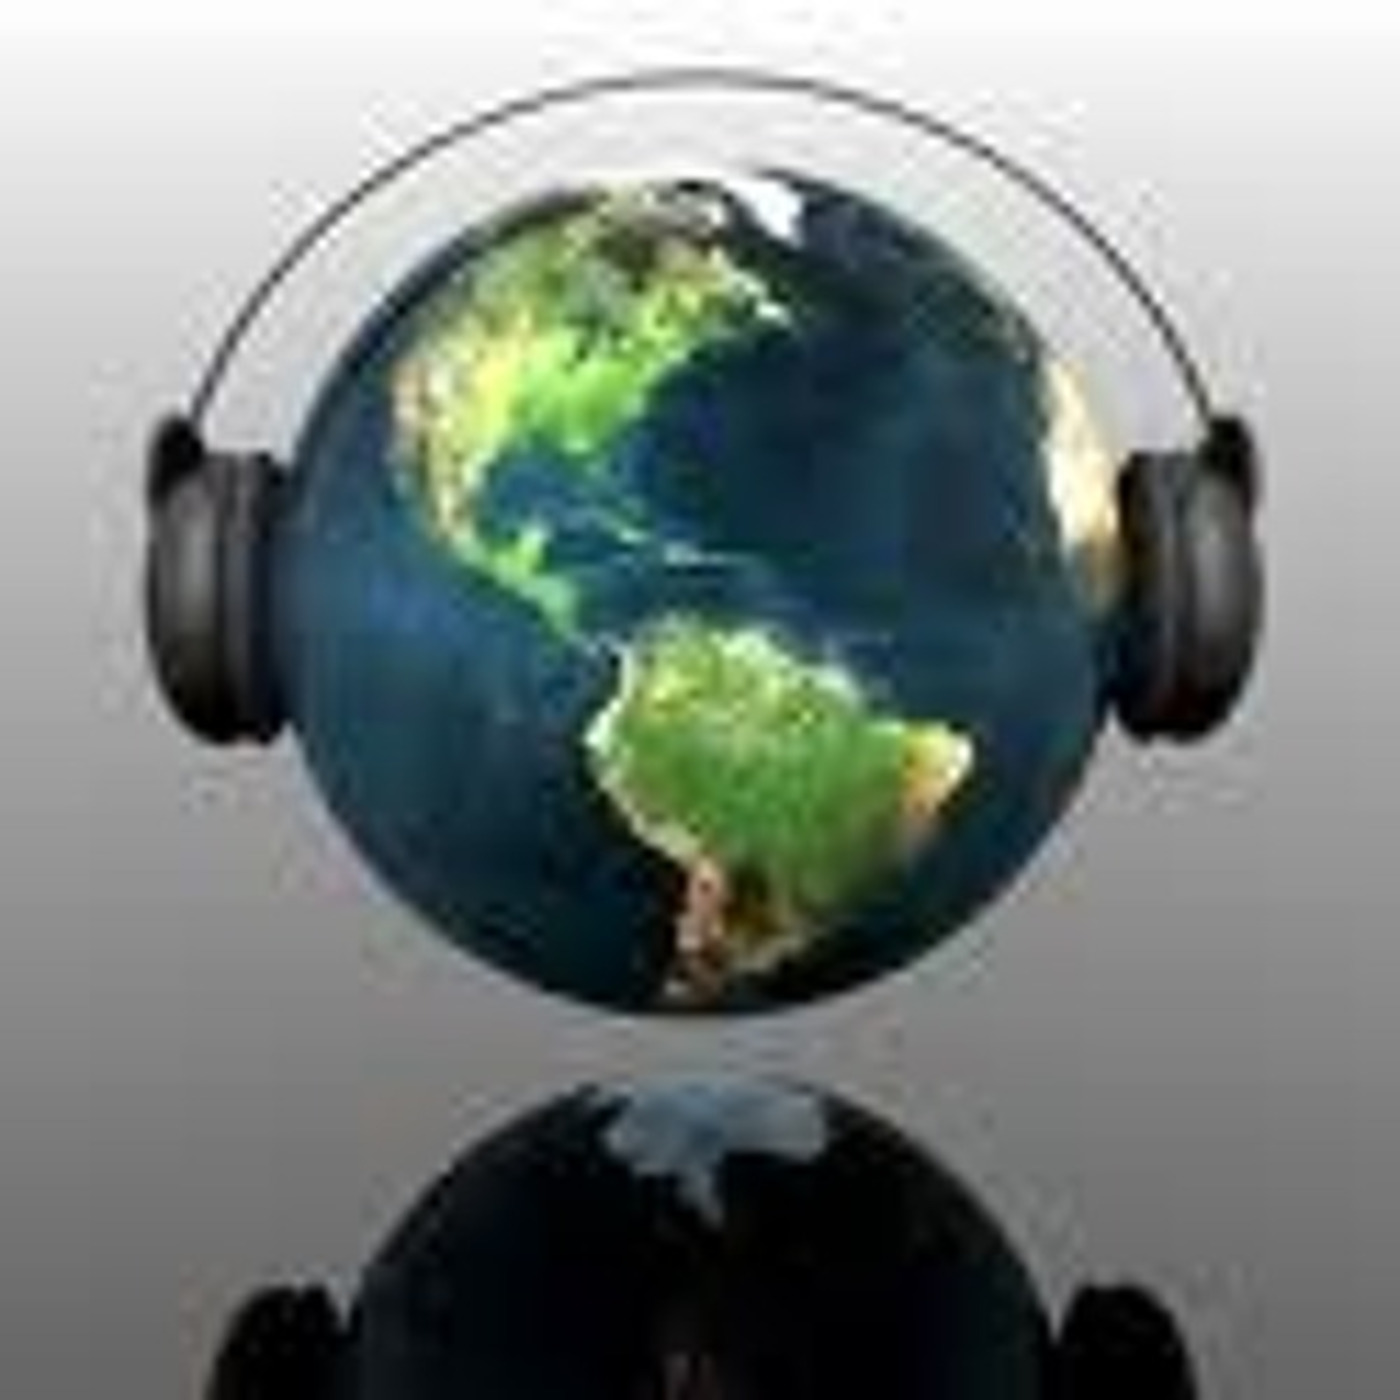 Global Vibes Vol. 2 - mixed by Mikie Wilde Sep 09